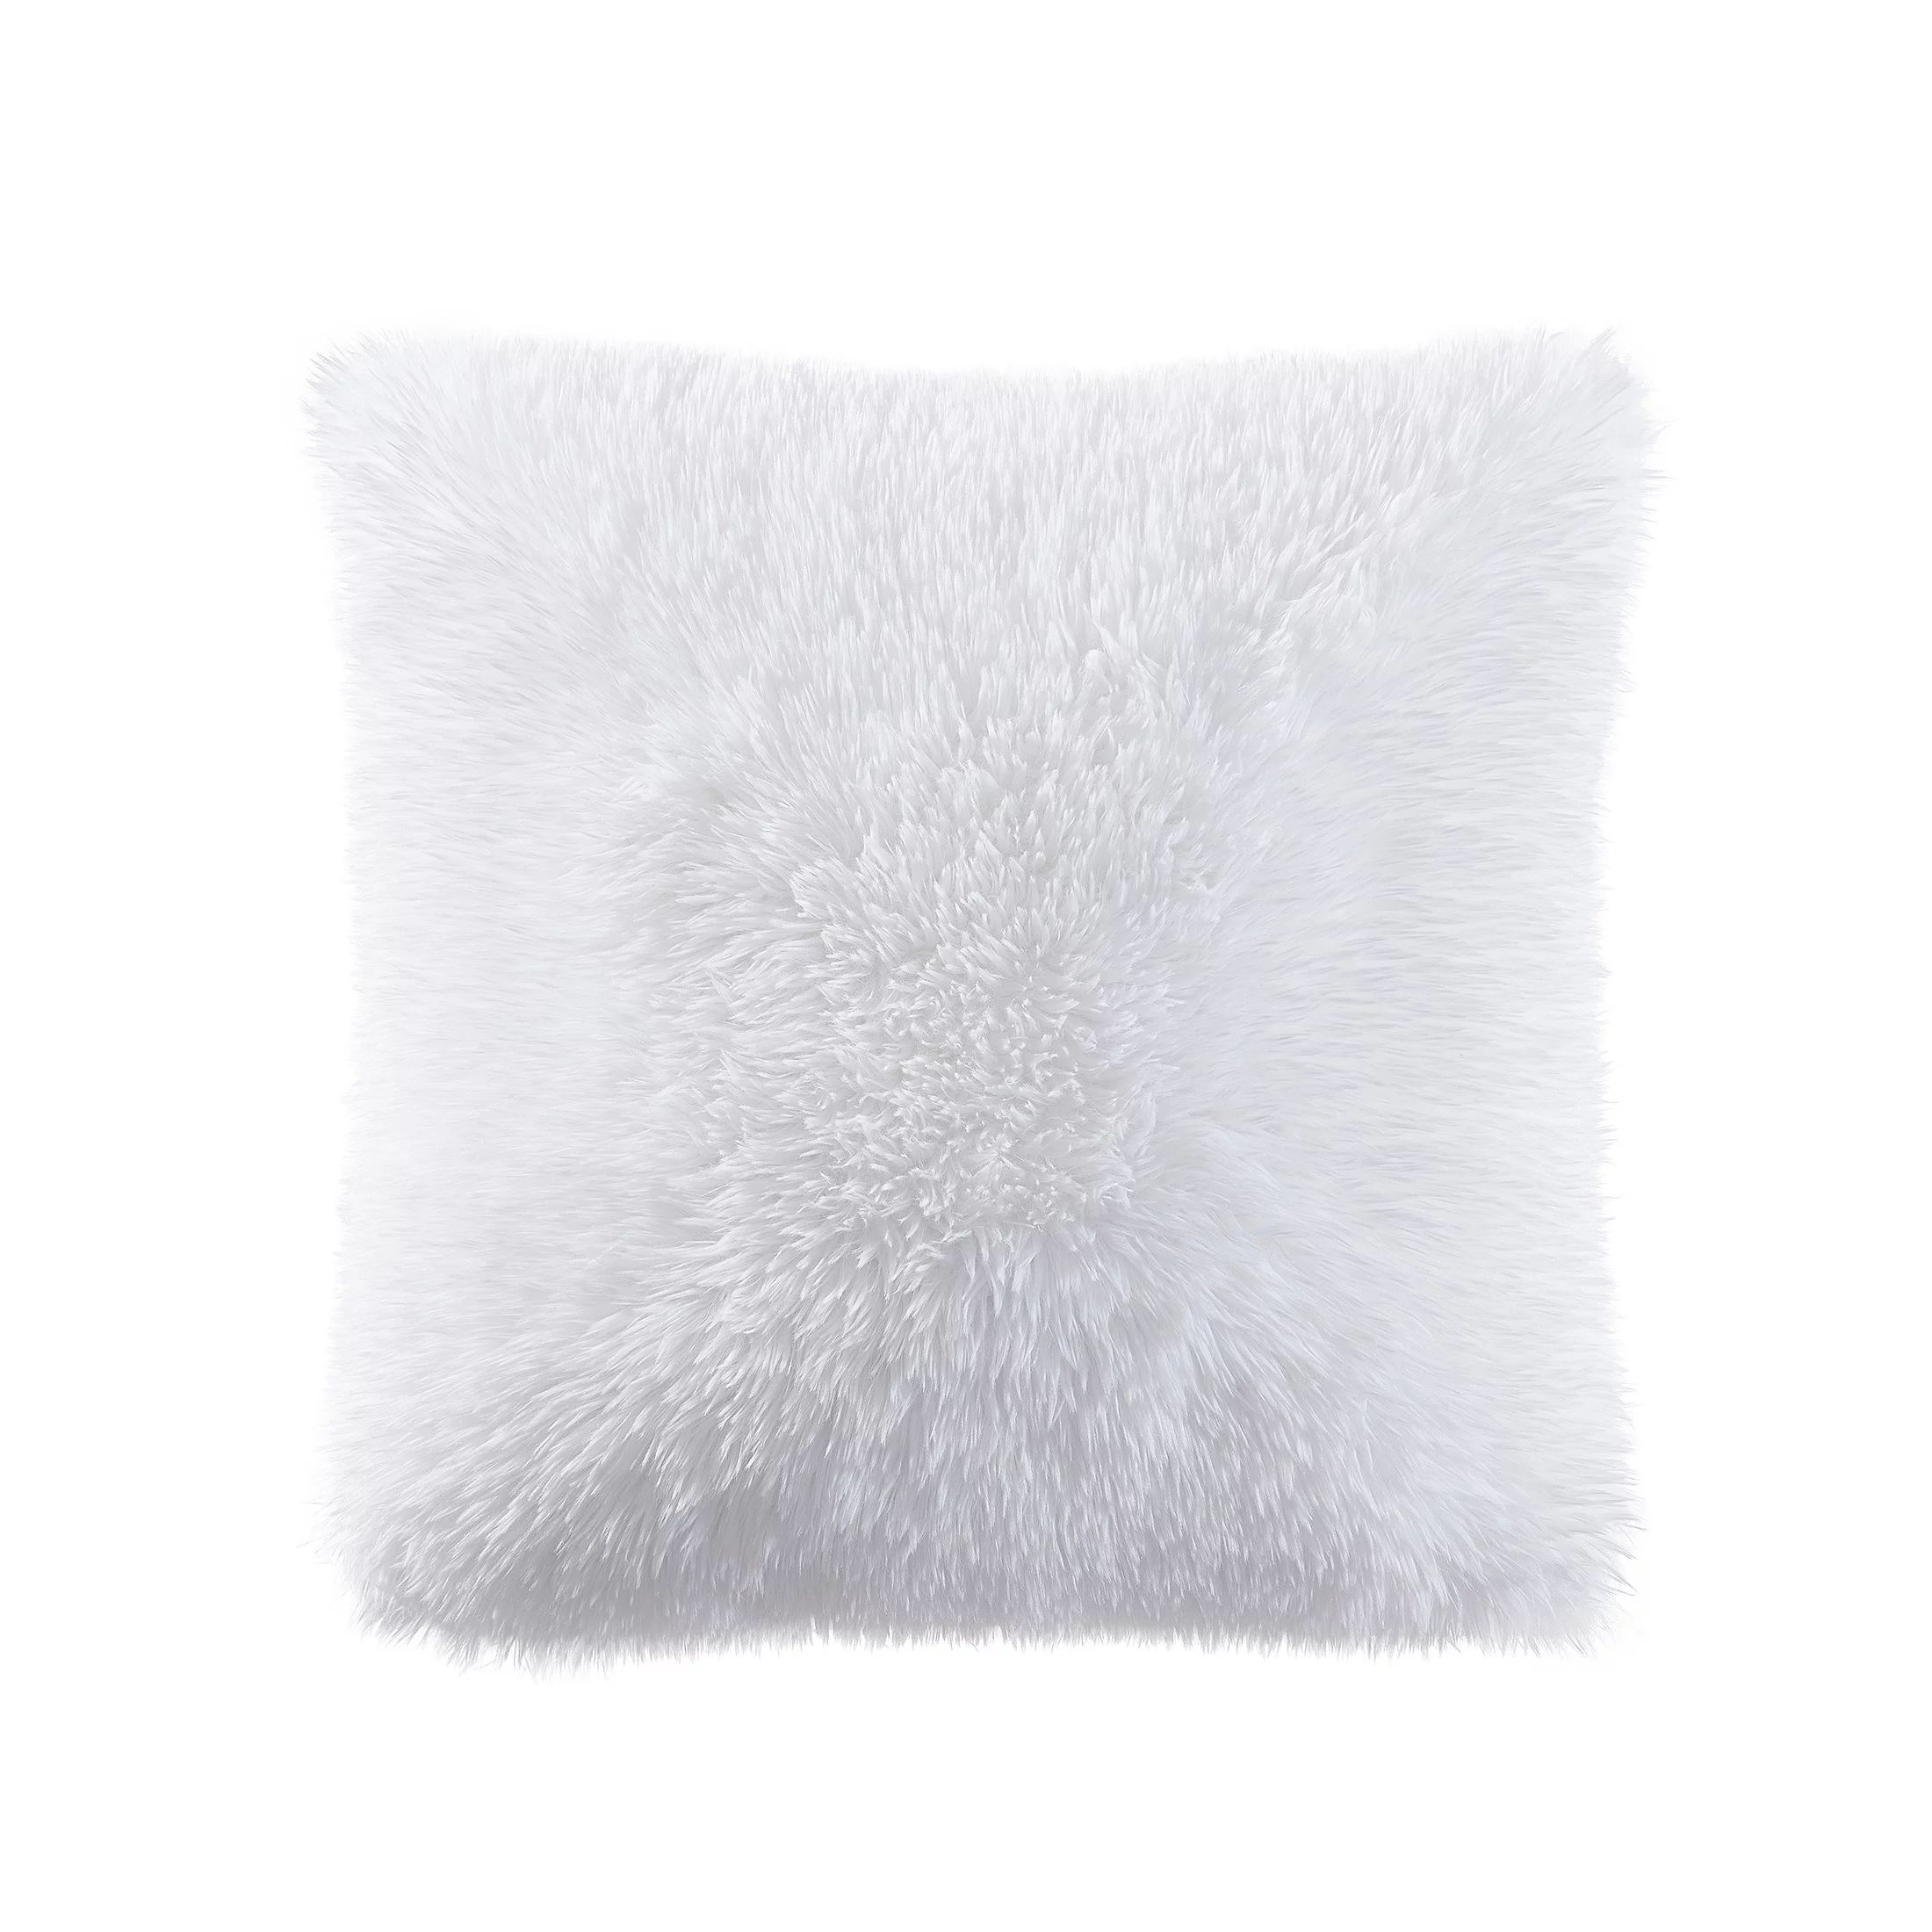 My Texas House Angel Faux Fur Decorative Pillow Cover, 18" x 18", Bright White | Walmart (US)